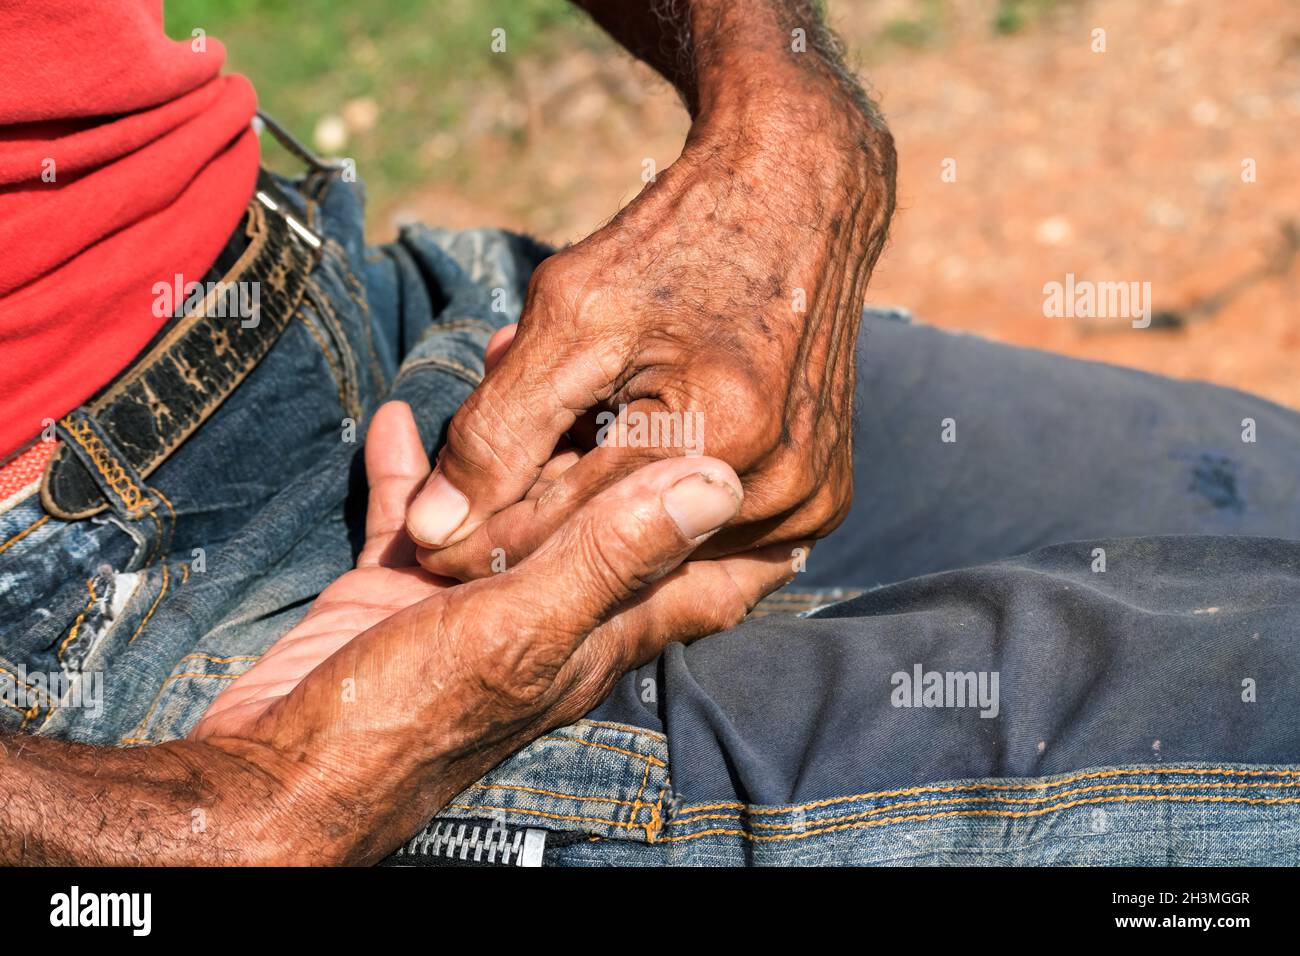 Close up of both hands of a dark skin senior man, one hand is within the other, both hands on his lap. He has callous skin. Stock Photo